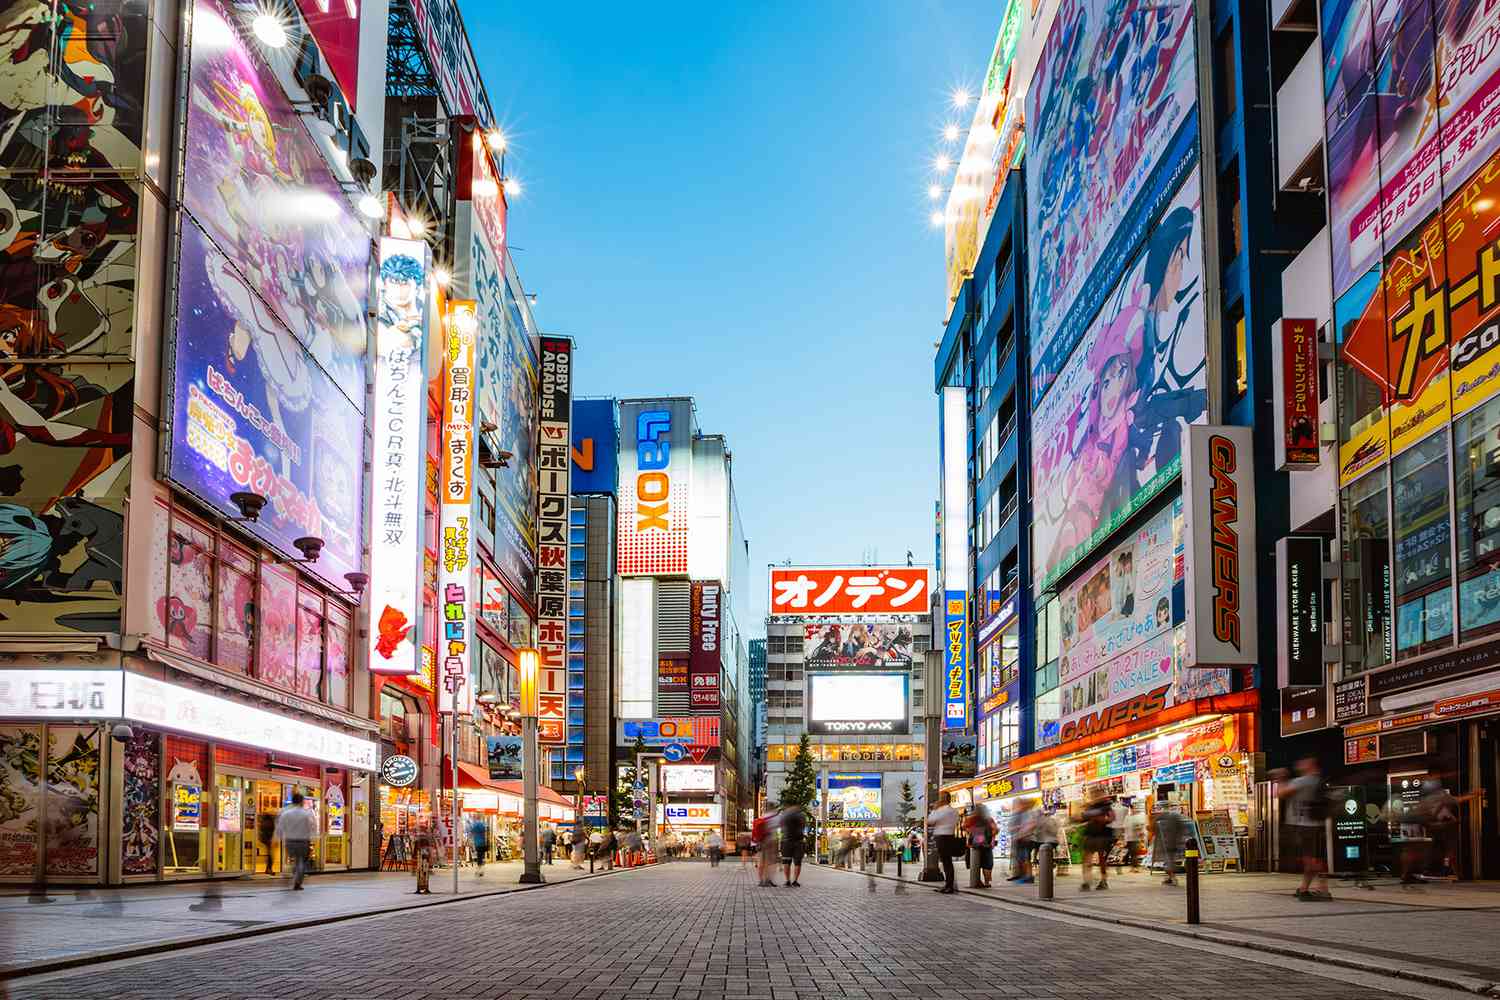 Japan's streets are a reflection of Manga's influence.